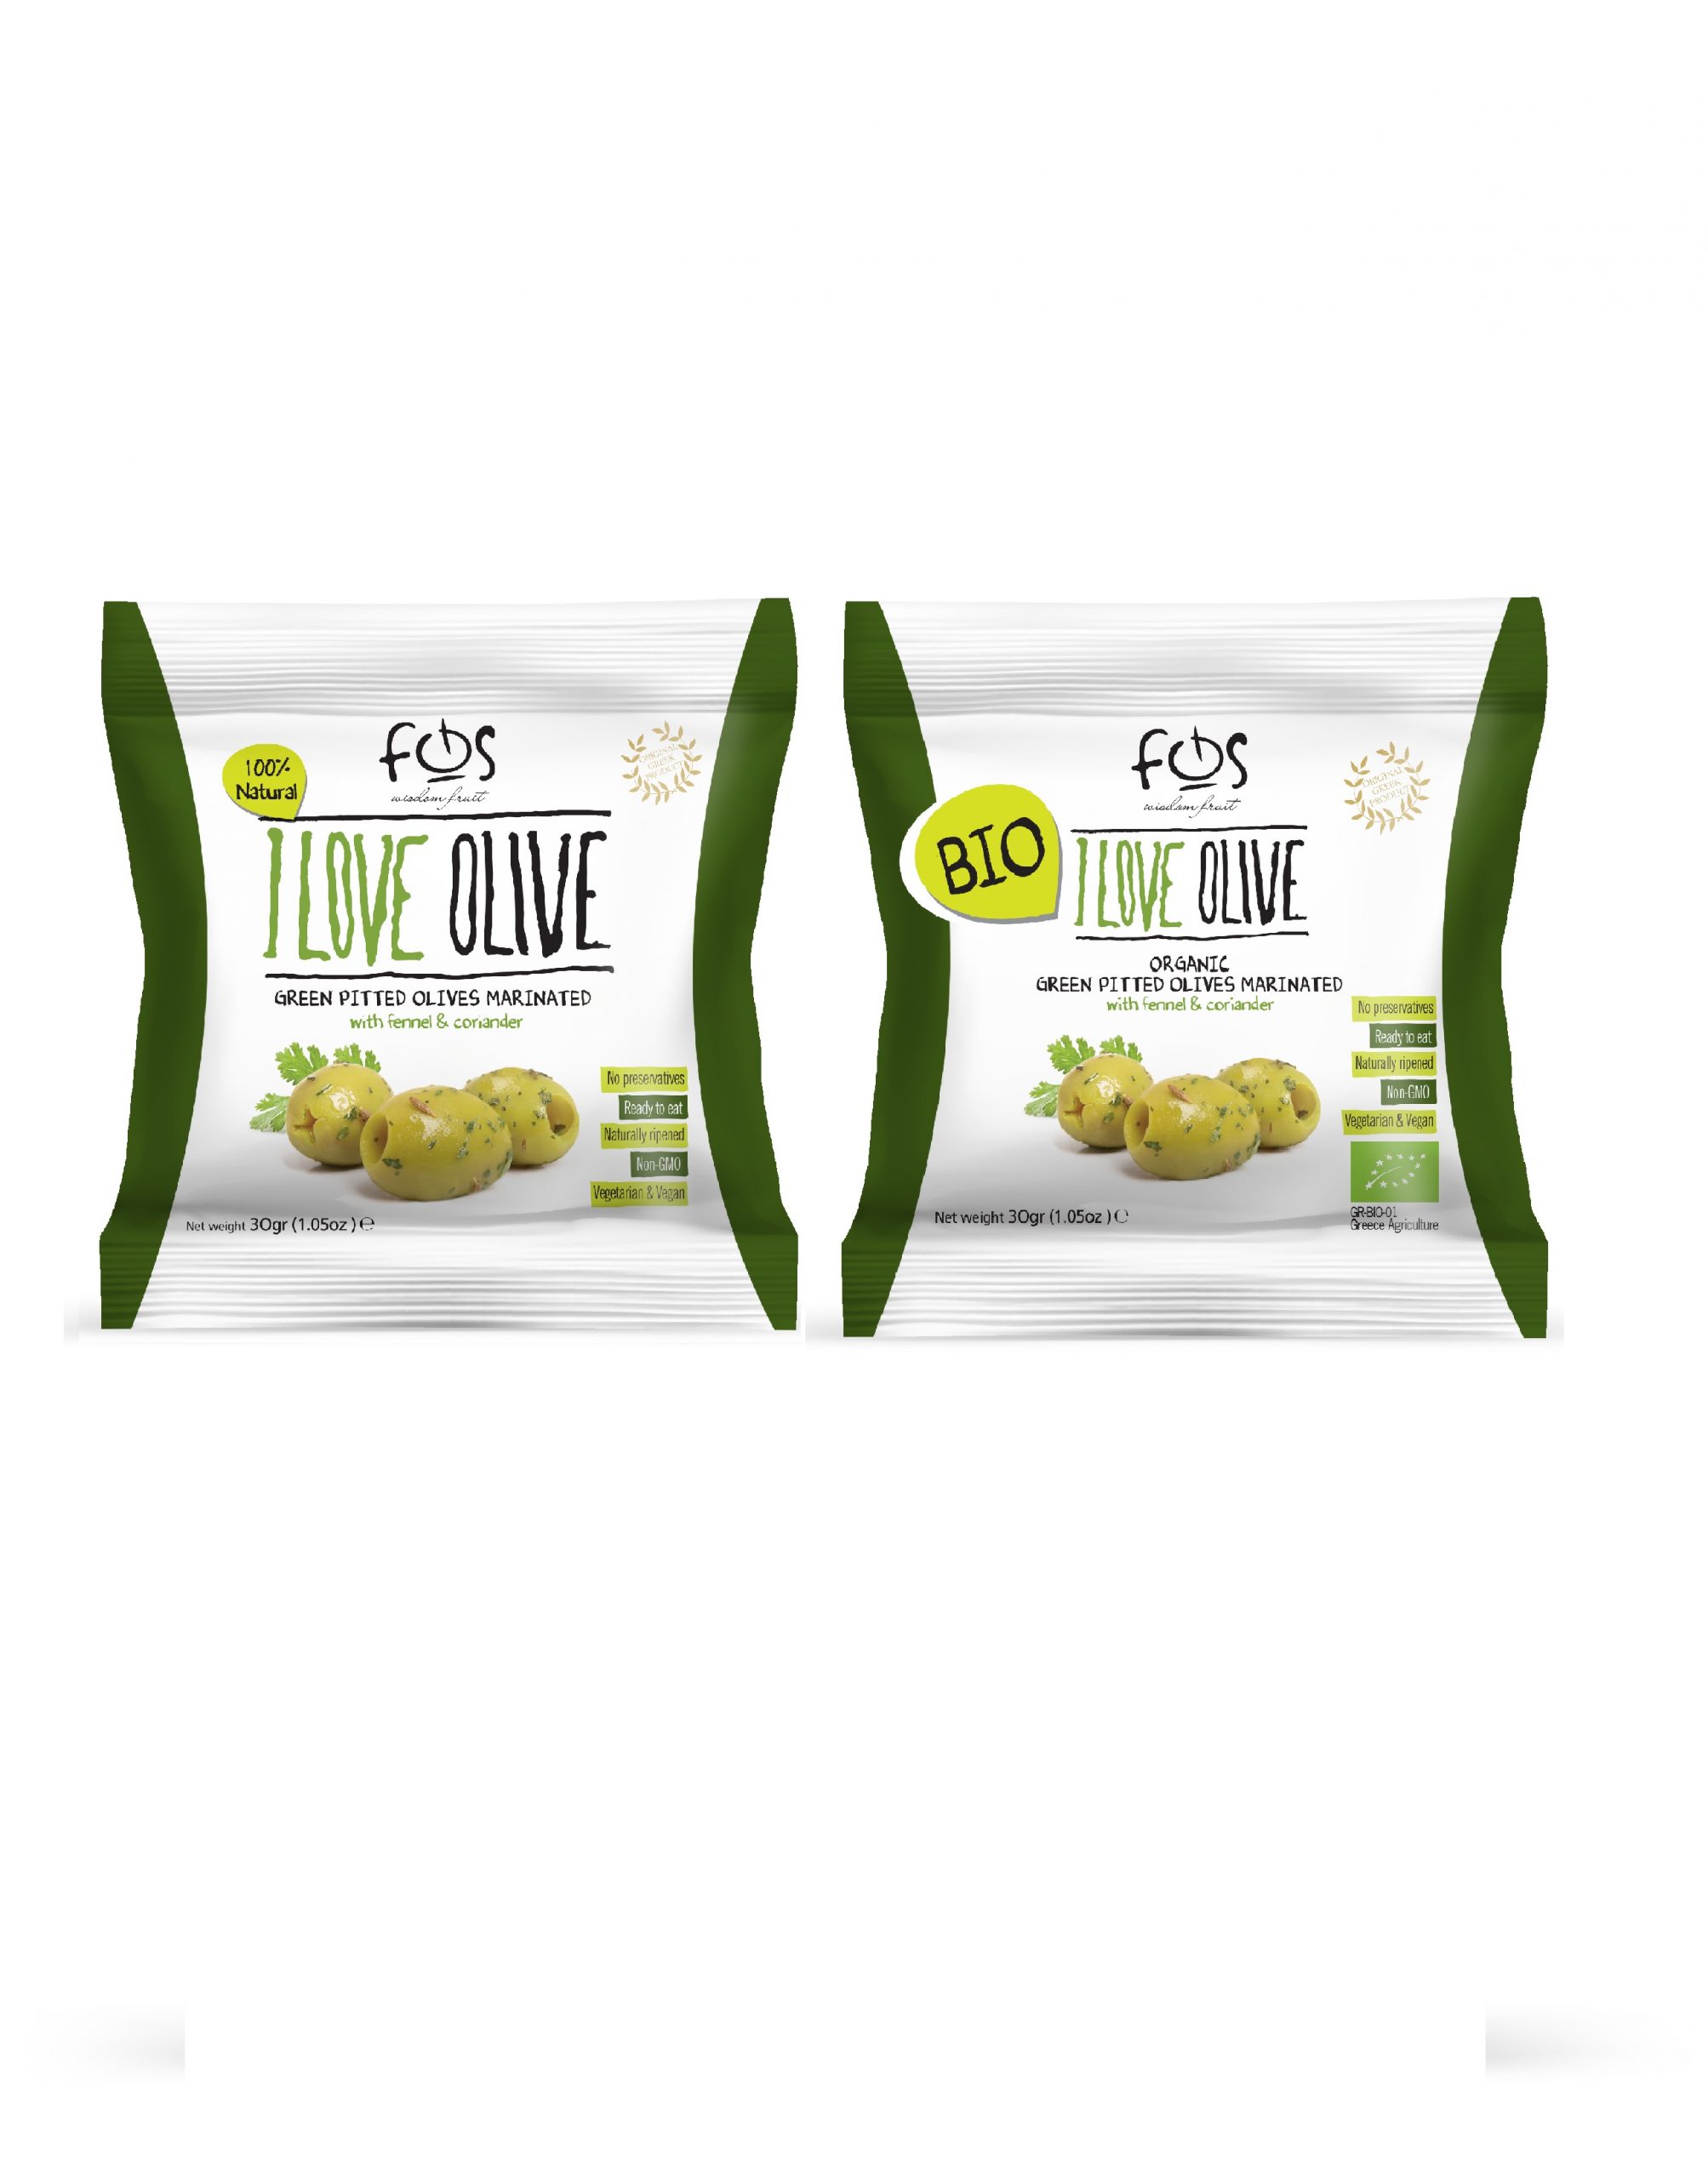 FOS –Greek Green marinated olives with fennel and coriander – pillowbag 30 gr and BIO 30 gr